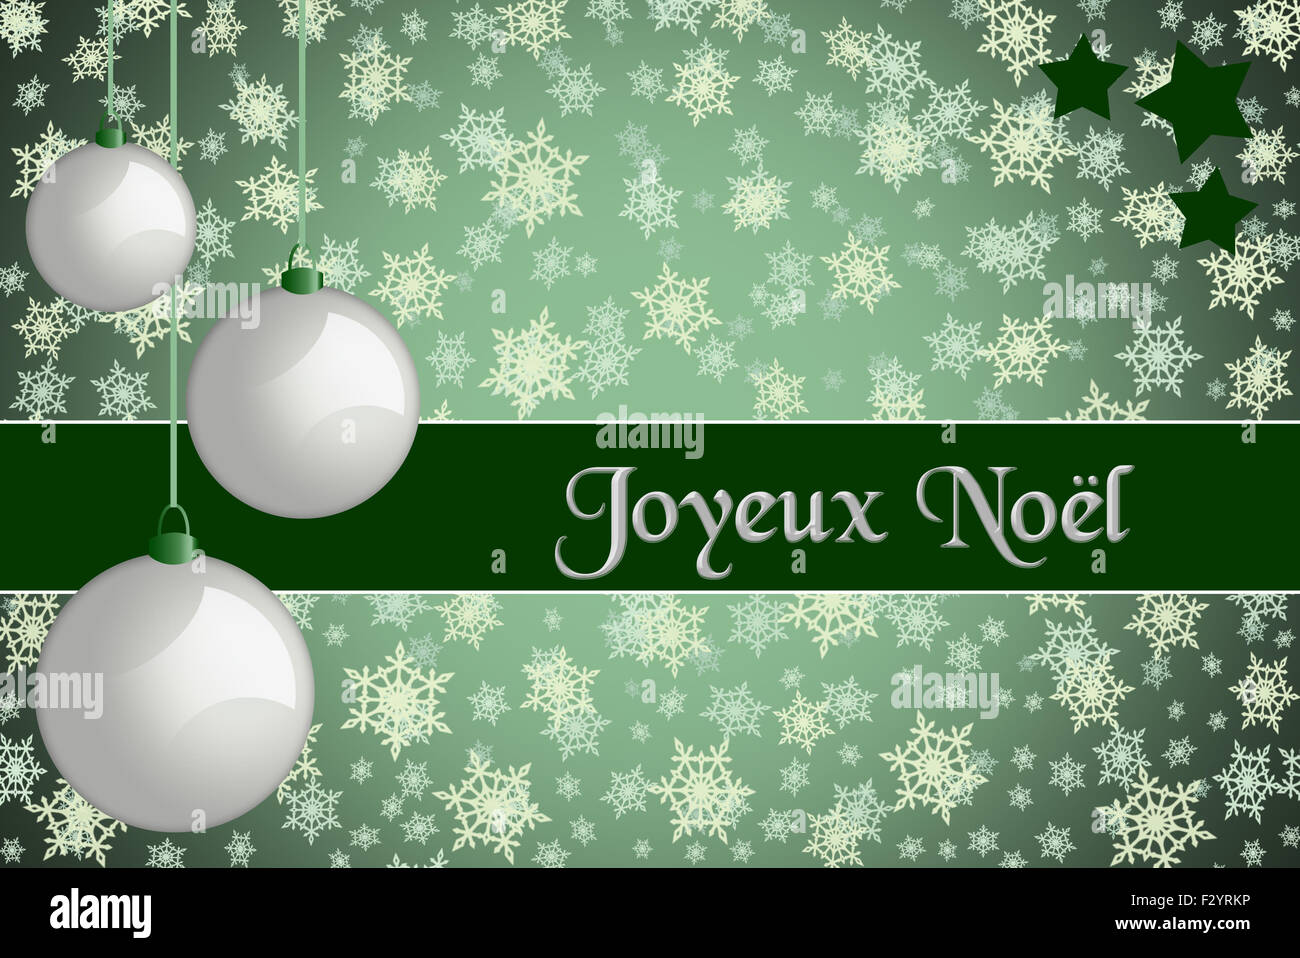 Christmas greeting card. "Joyeux Noël" Green colored Christmas card with retro white baubles and snowflake background. Stock Photo